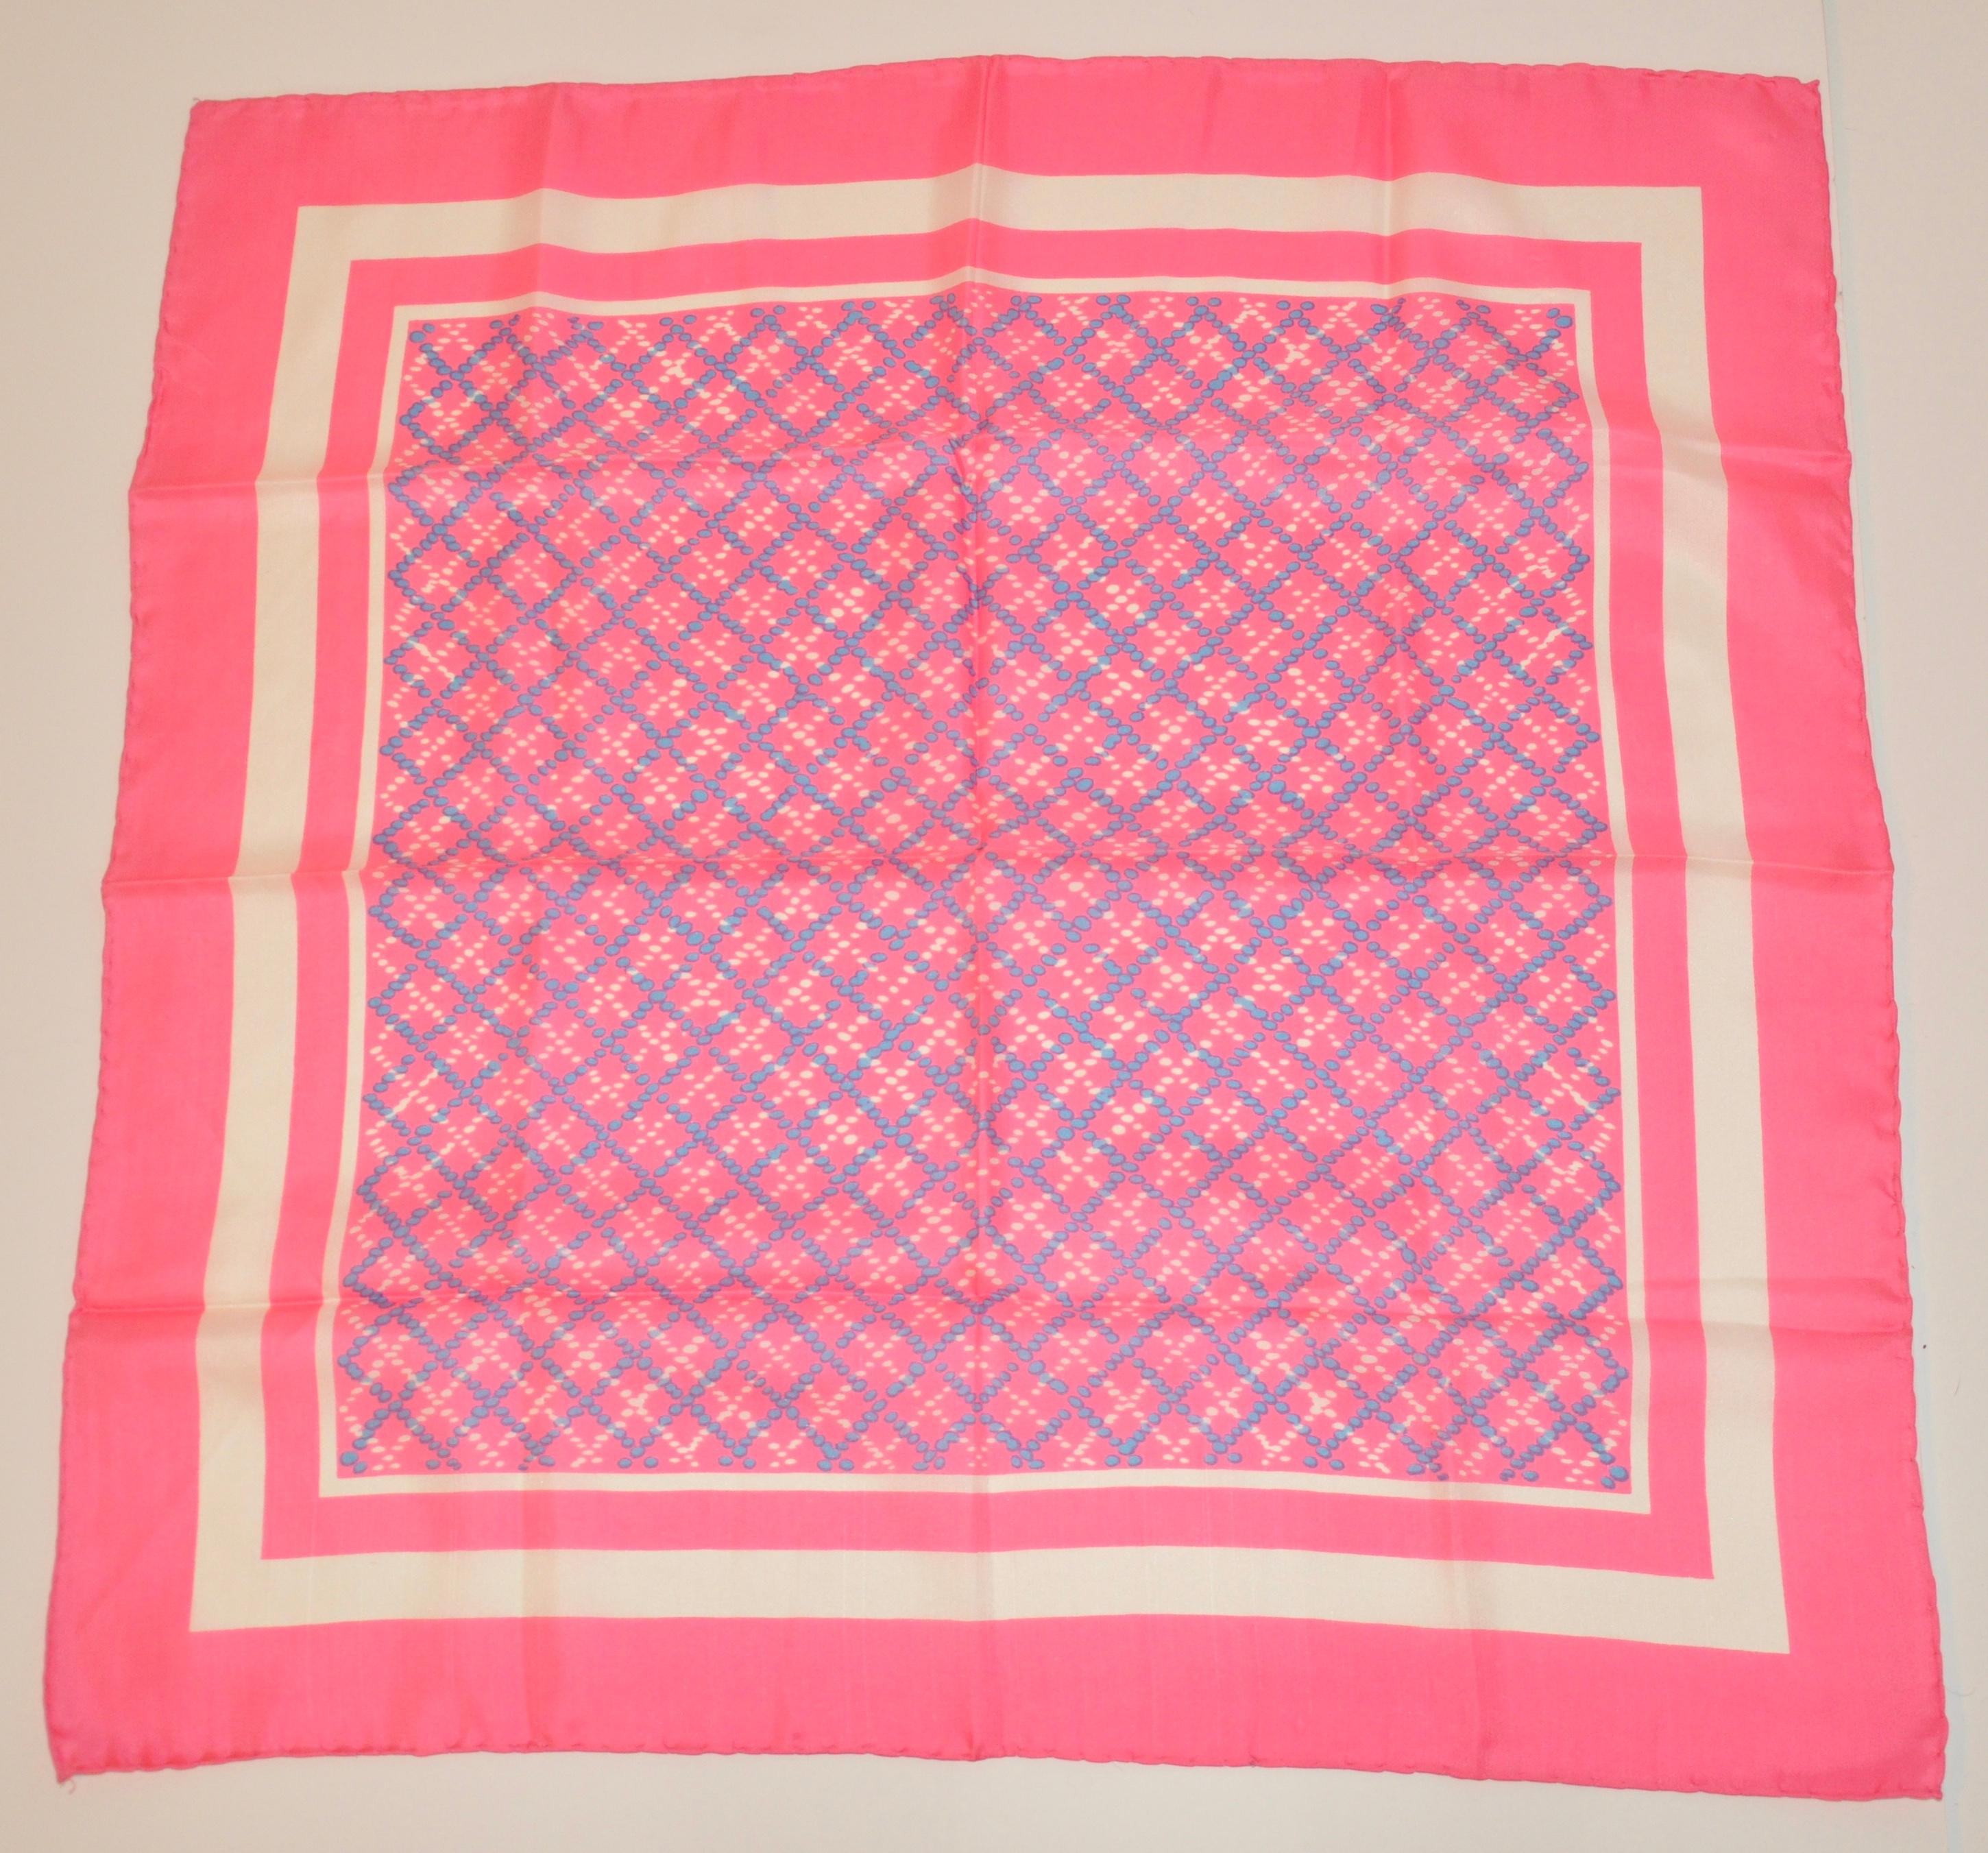      This wonderfully whimsical neon pink silk scarf accented with  specks of baby blue and white,  measures 30 inches by 30 inches. Edges are hand-rolled and Made in Italy.